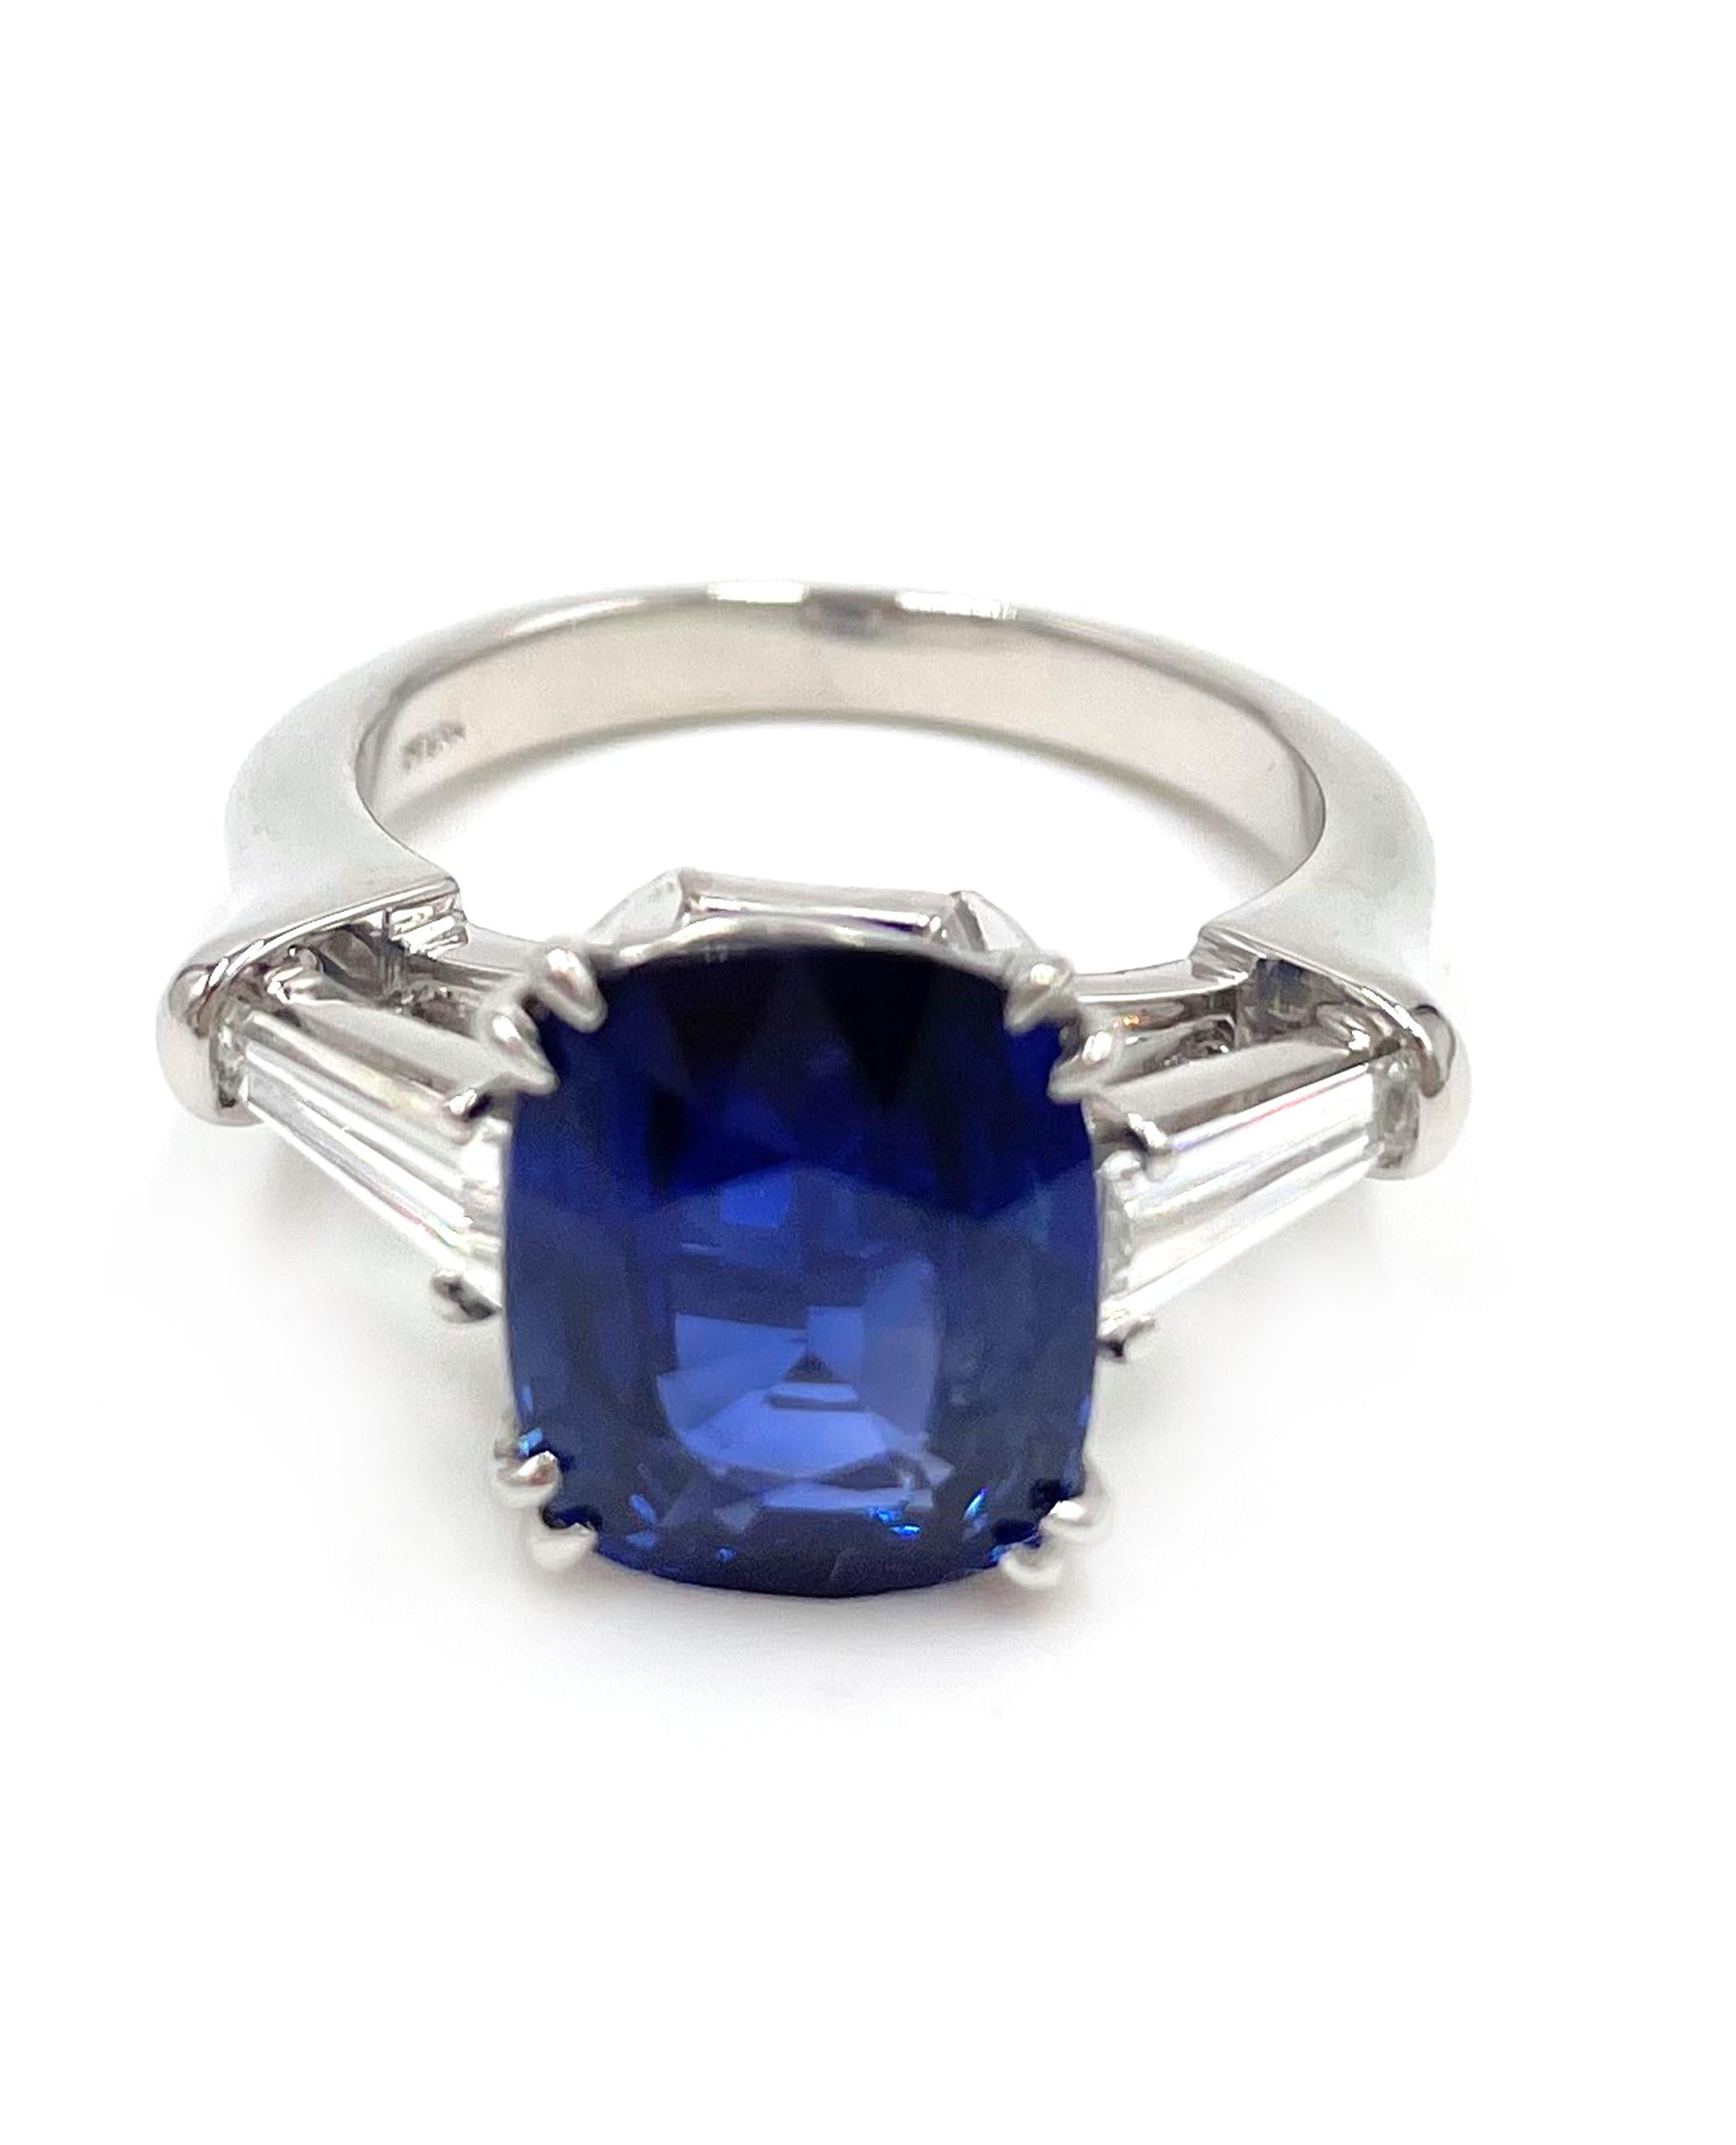 Platinum hand made ring with two tapered baguette diamonds totaling 0.56 carats (G color / VS clarity) and one center cushion cut Ceylon sapphire 5.14 carats. 

* Includes certificate for center stone
* Finger size 7. Can be resized.